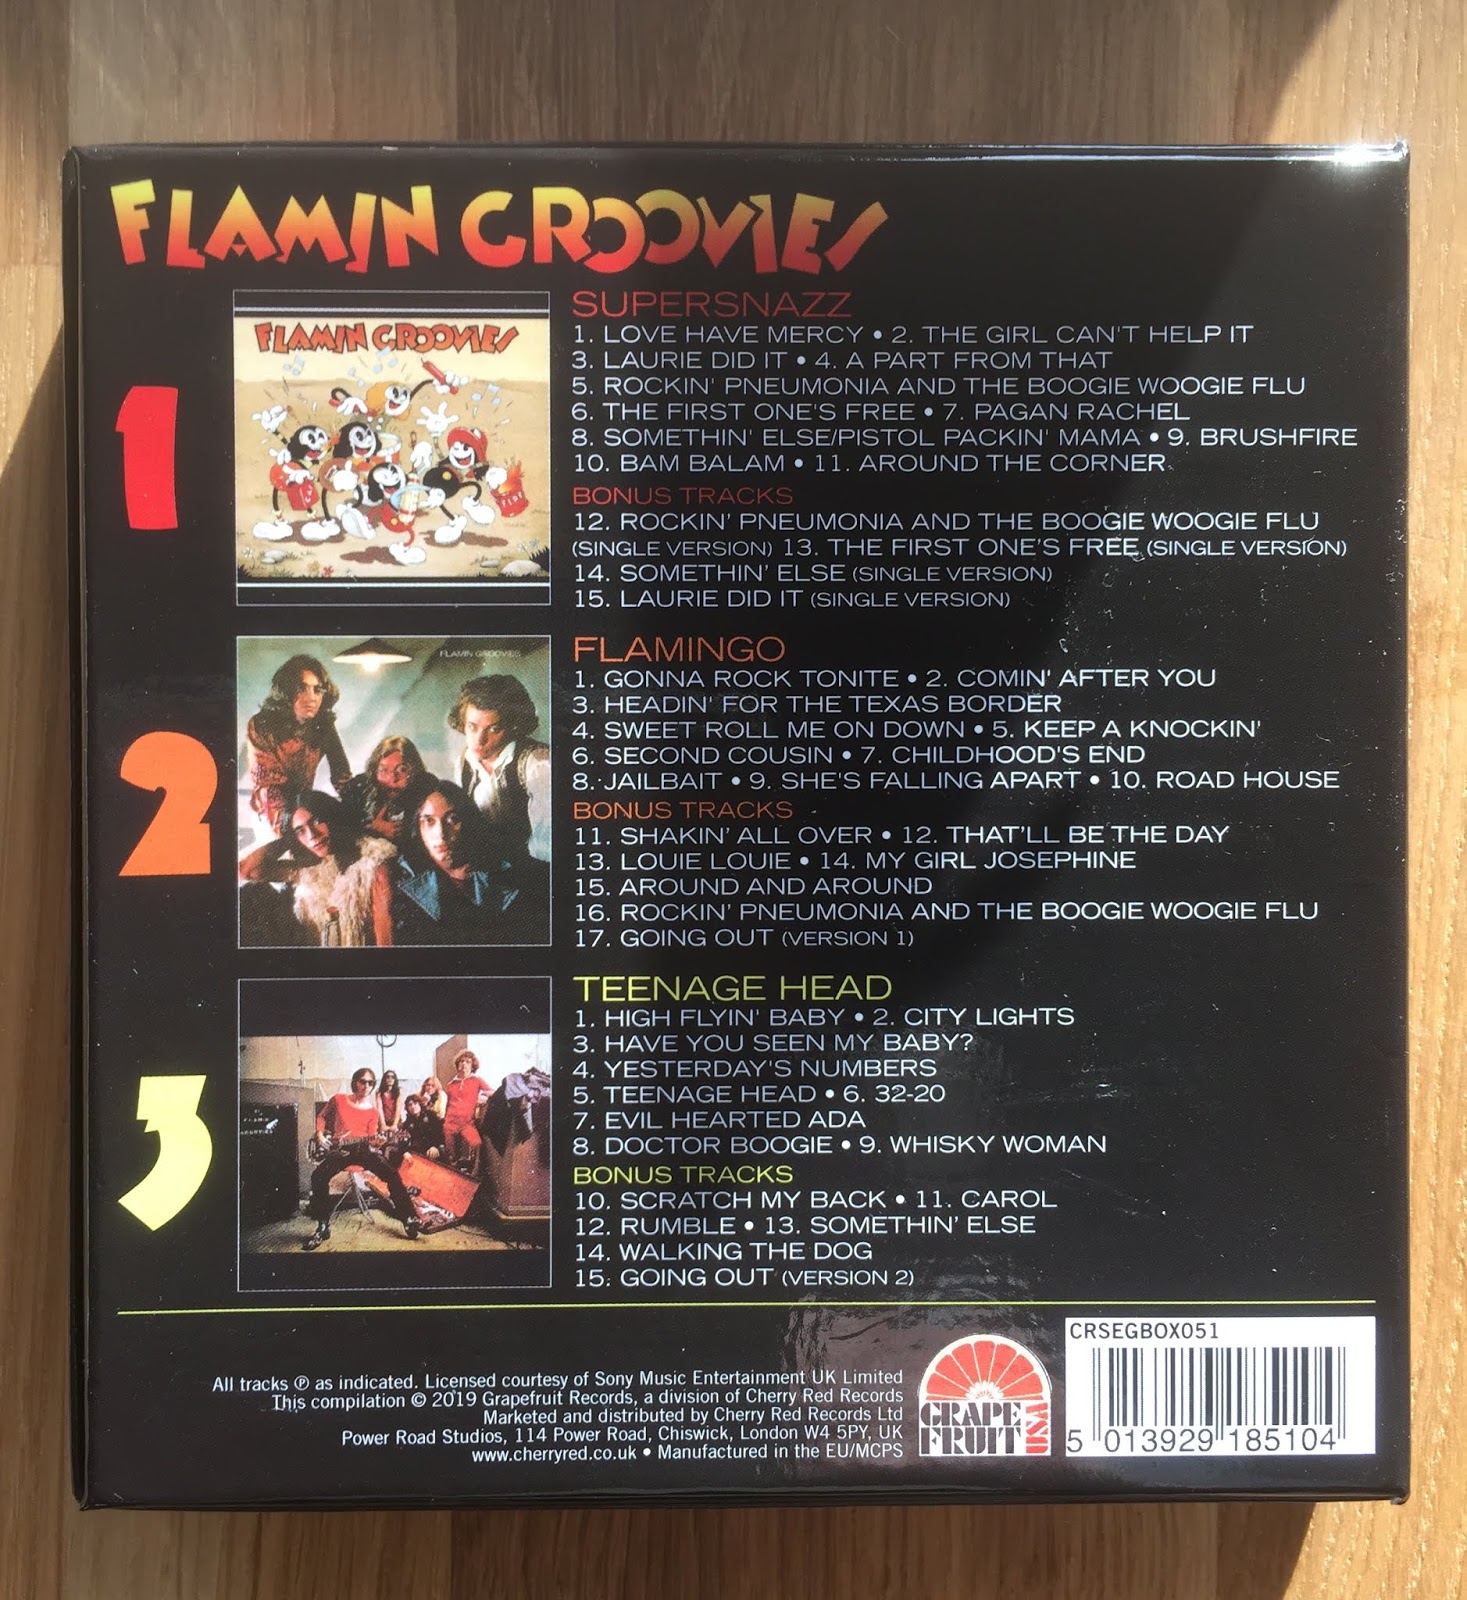 Sounds Good Looks Good Gonna Rock Tonite The Complete Recordings 1969 1971 By Flamin Groovies February 19 Uk Grapefruit Records 3cd Box Set A Review By Mark Barry